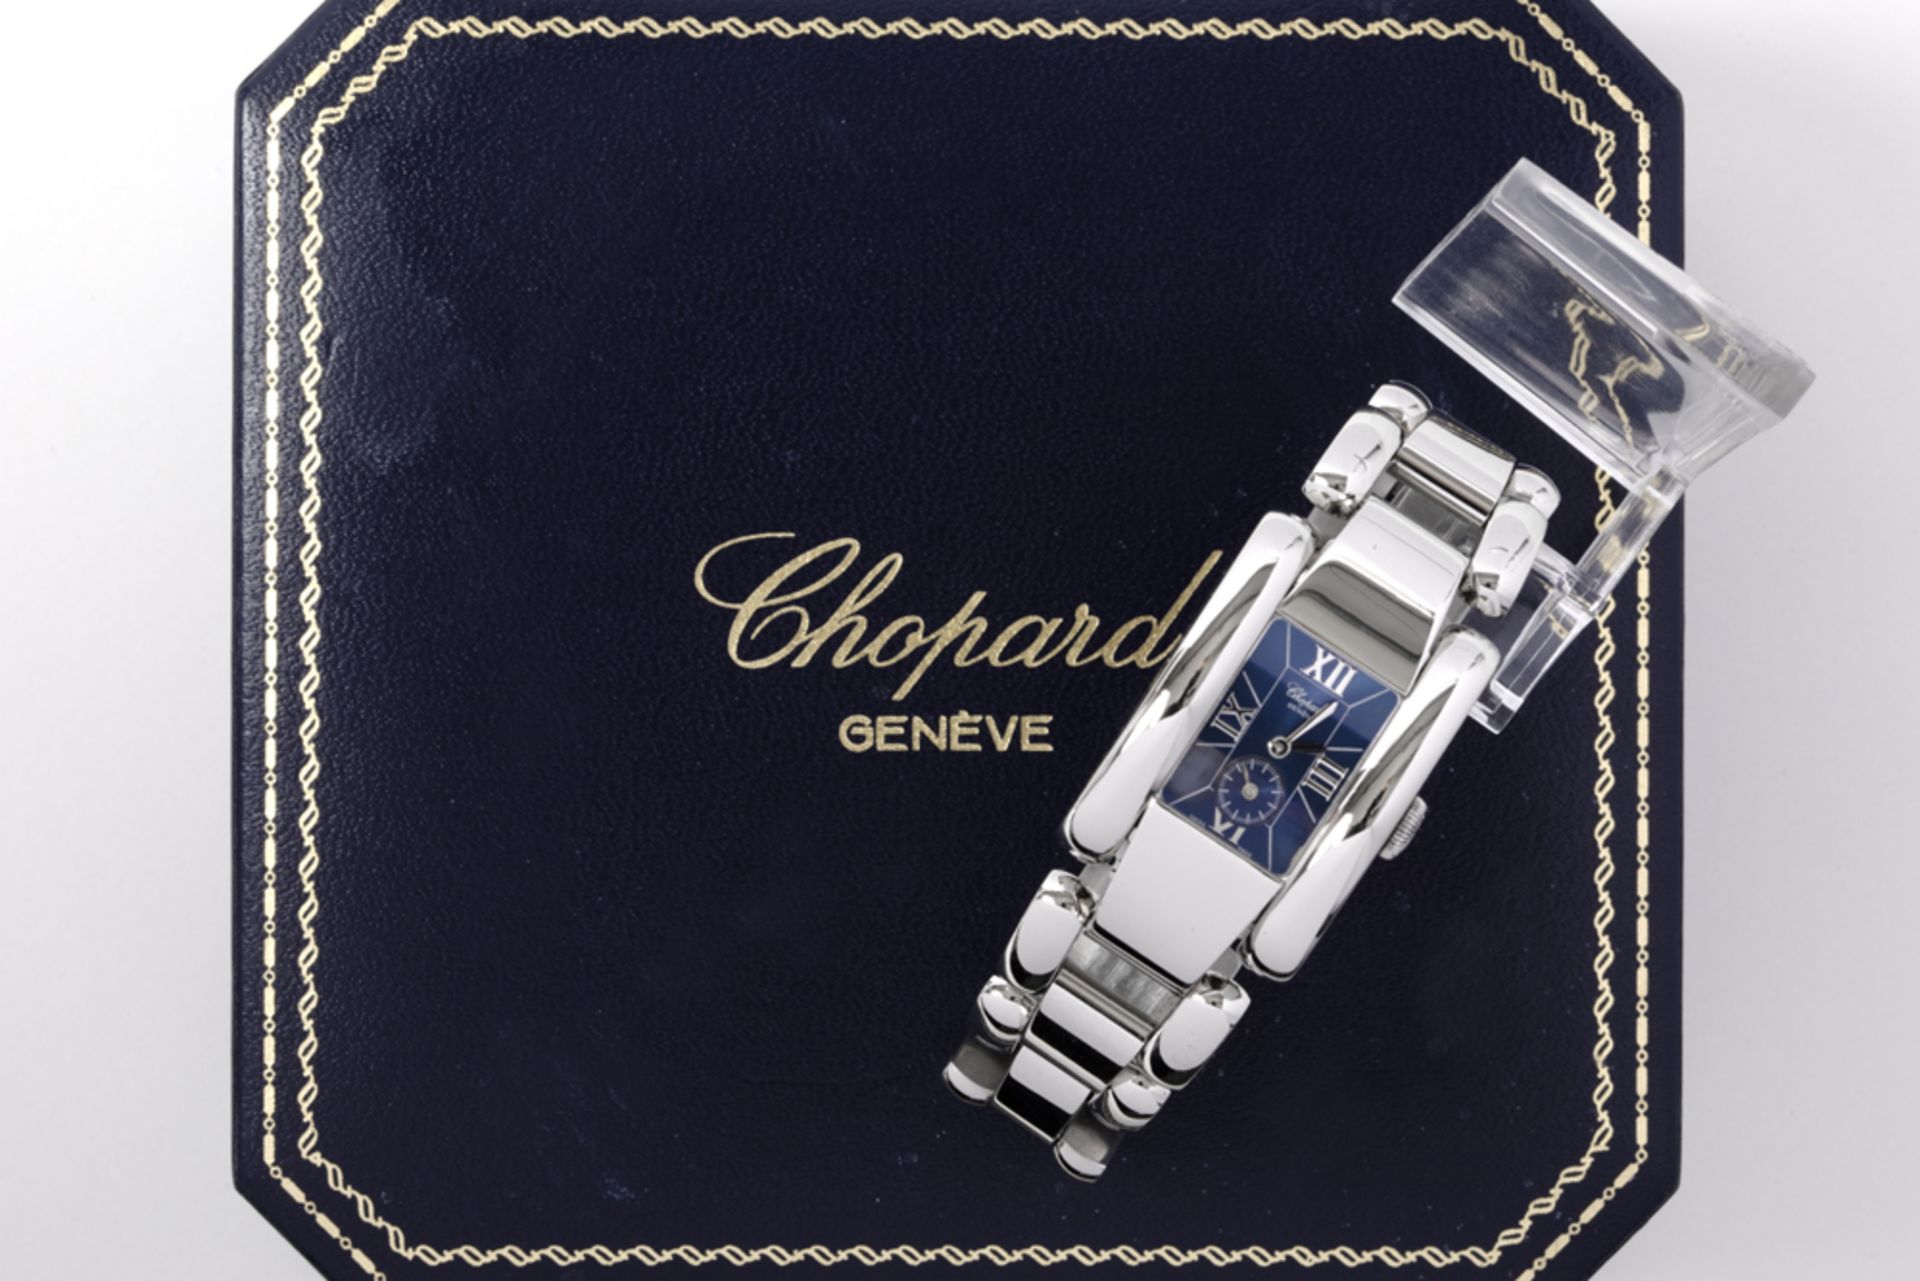 Chopard signed completely original "La Strada" quartz ladies' wristwatch in steel with a blue face - - Image 3 of 4